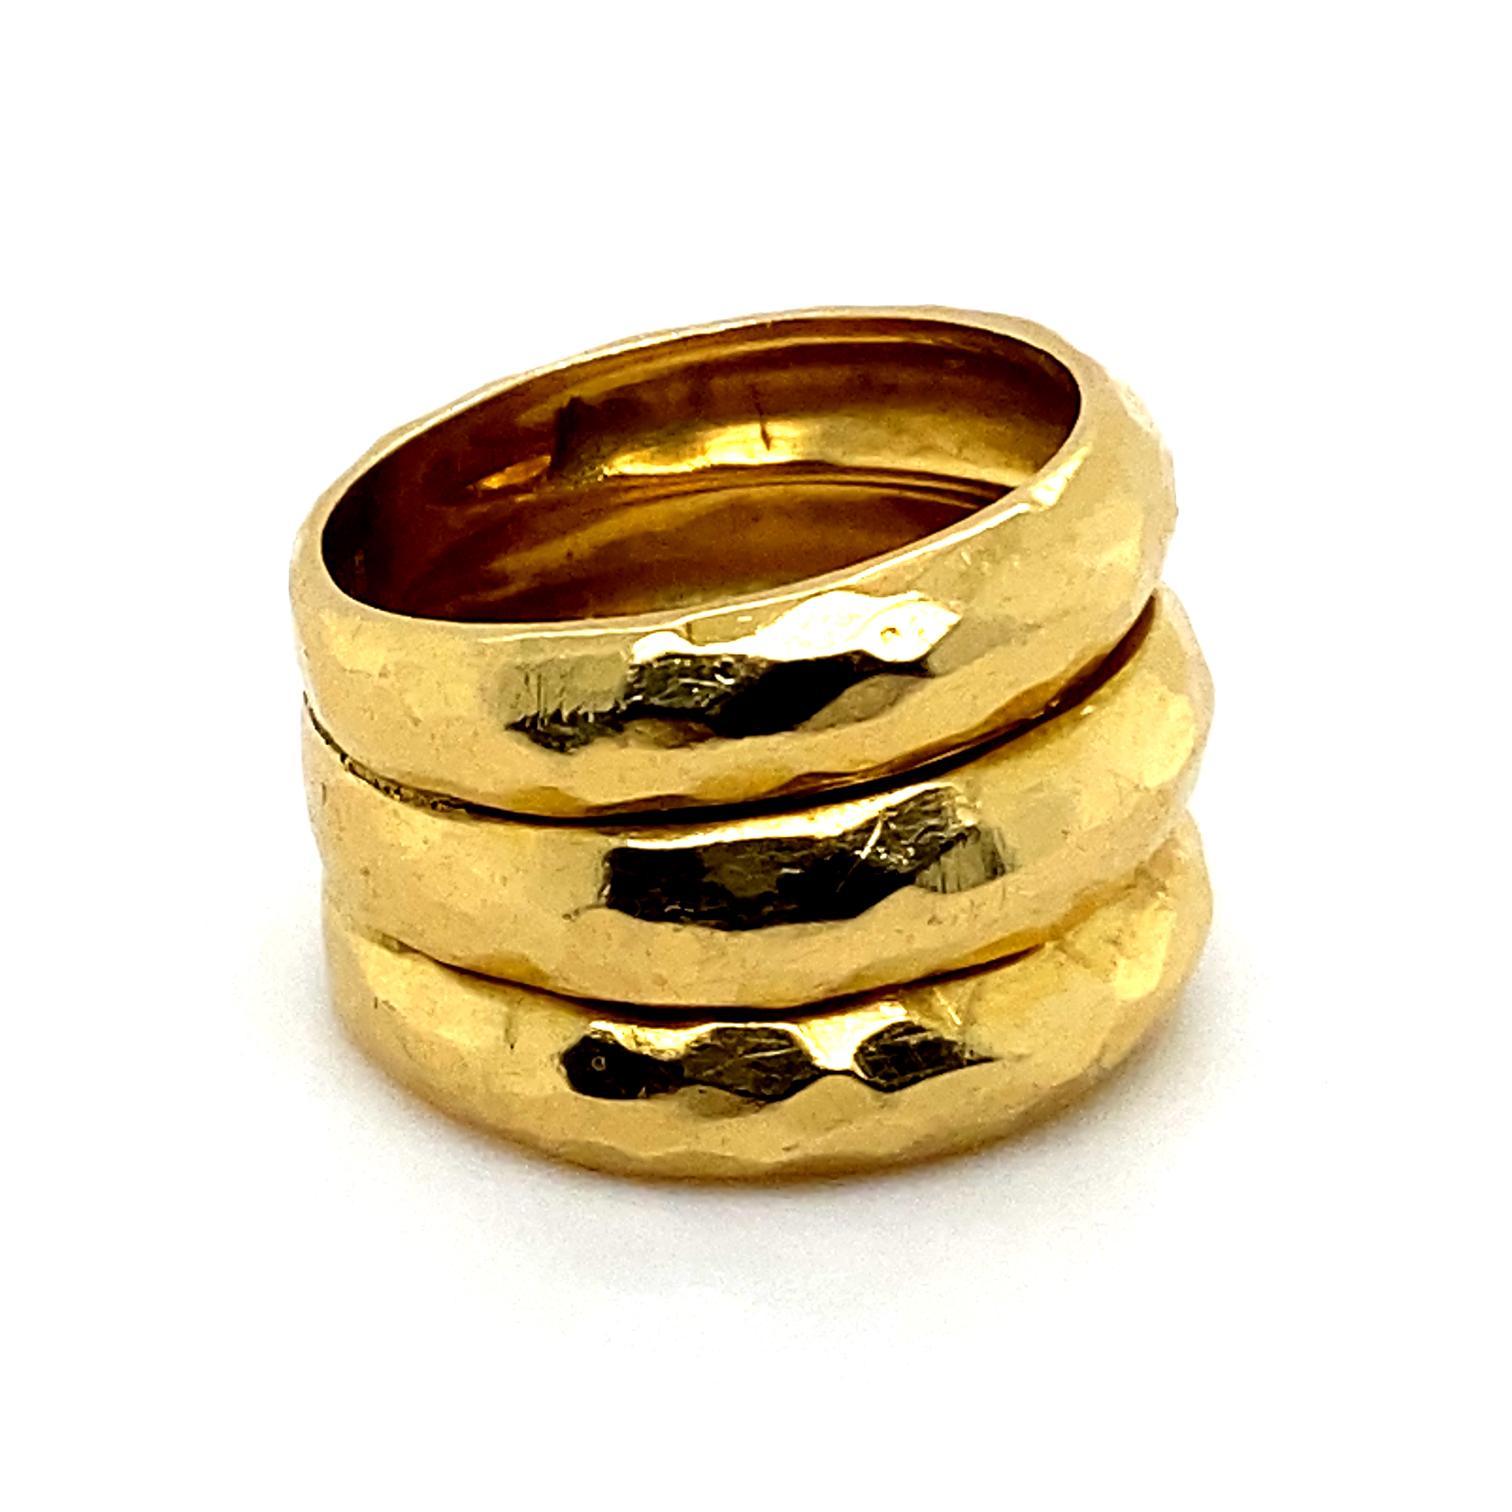 A vintage triple row 18 karat yellow gold ring

This ring is designed as three rings stacked atop each other and fused together in a bold and unusual design.
Each ring features hammered and textured detail to its surface.

This is a comfortable